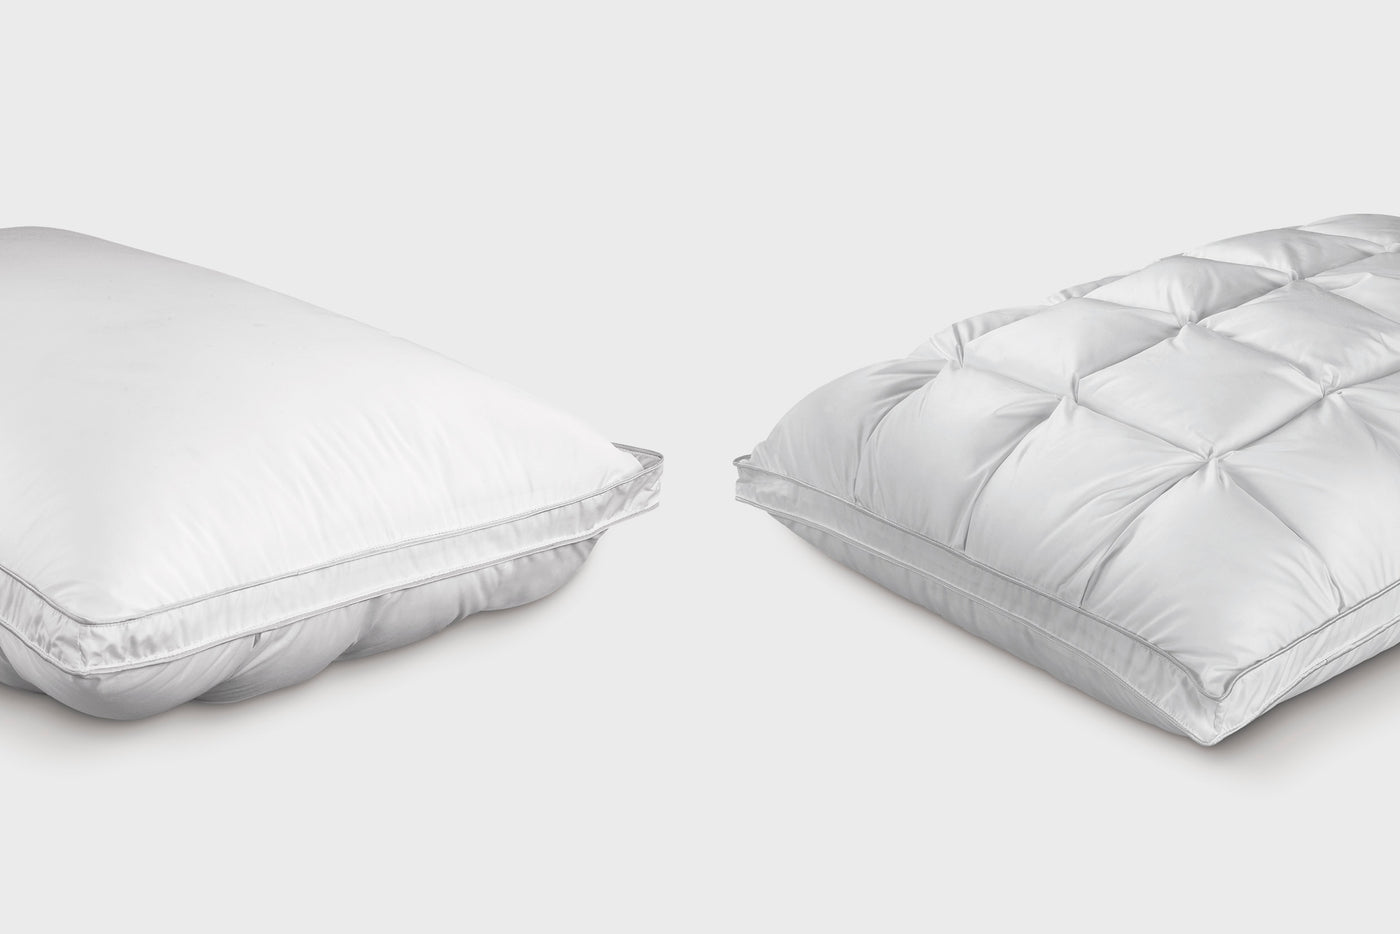 Image of two SoftCell® Pillows, one showing the SoftCell® side and the other showing the traditional side